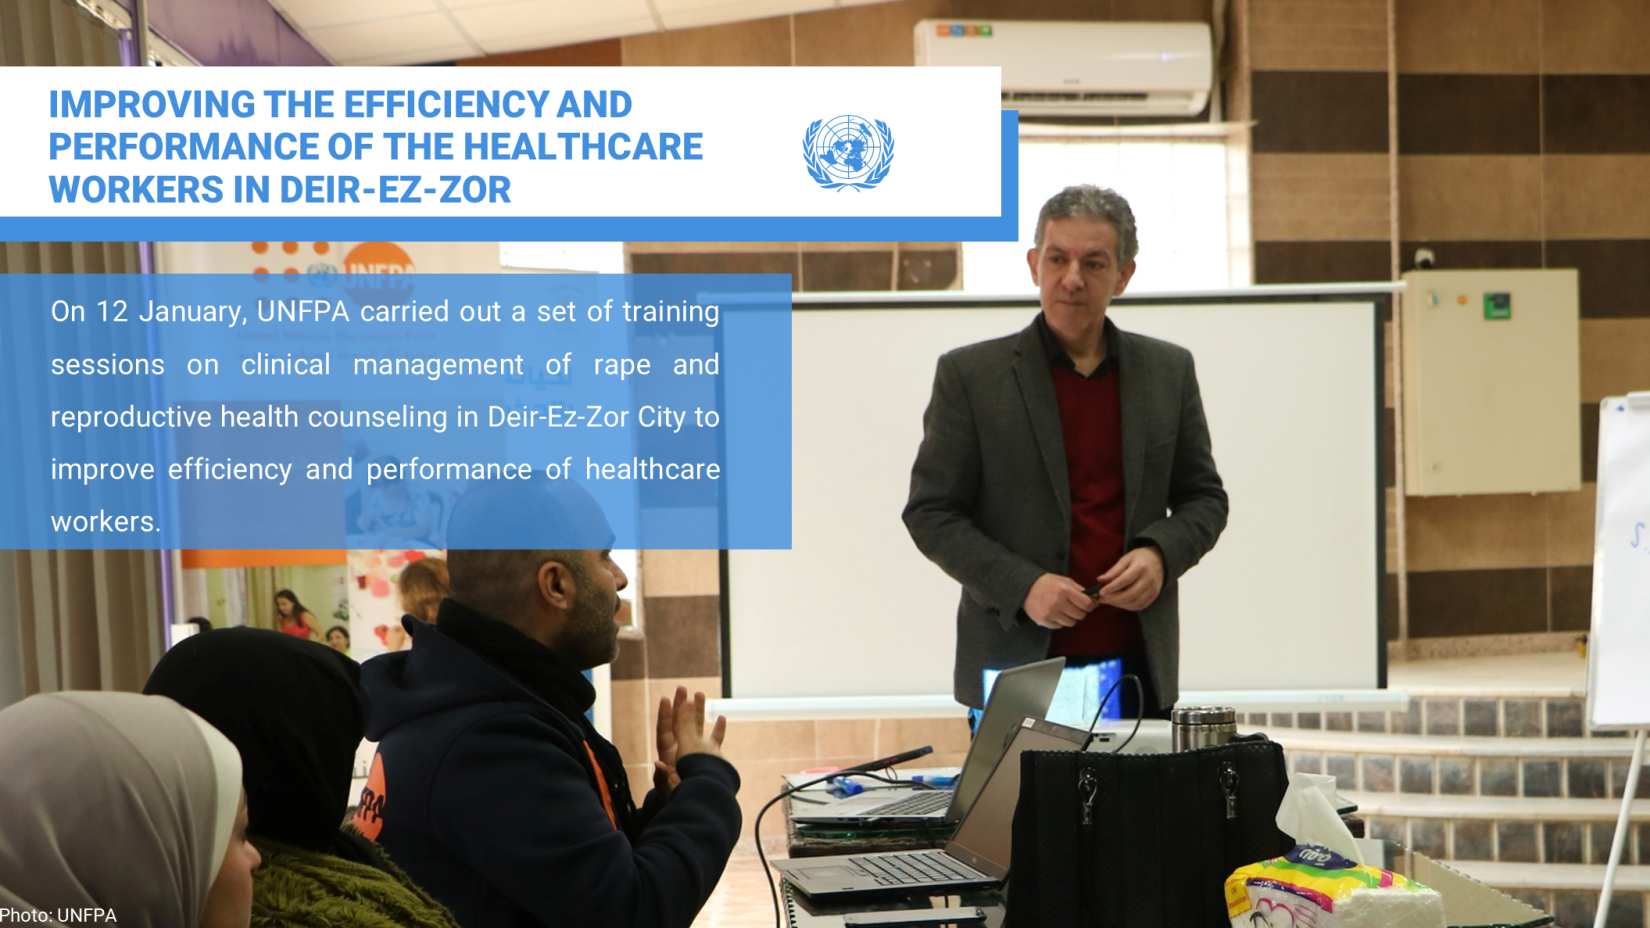 UNFPA IMPROVING THE EFFICIENCY AND PERFORMANCE OF THE HEALTHCARE WORKERS IN DEIR-EZ-ZOR